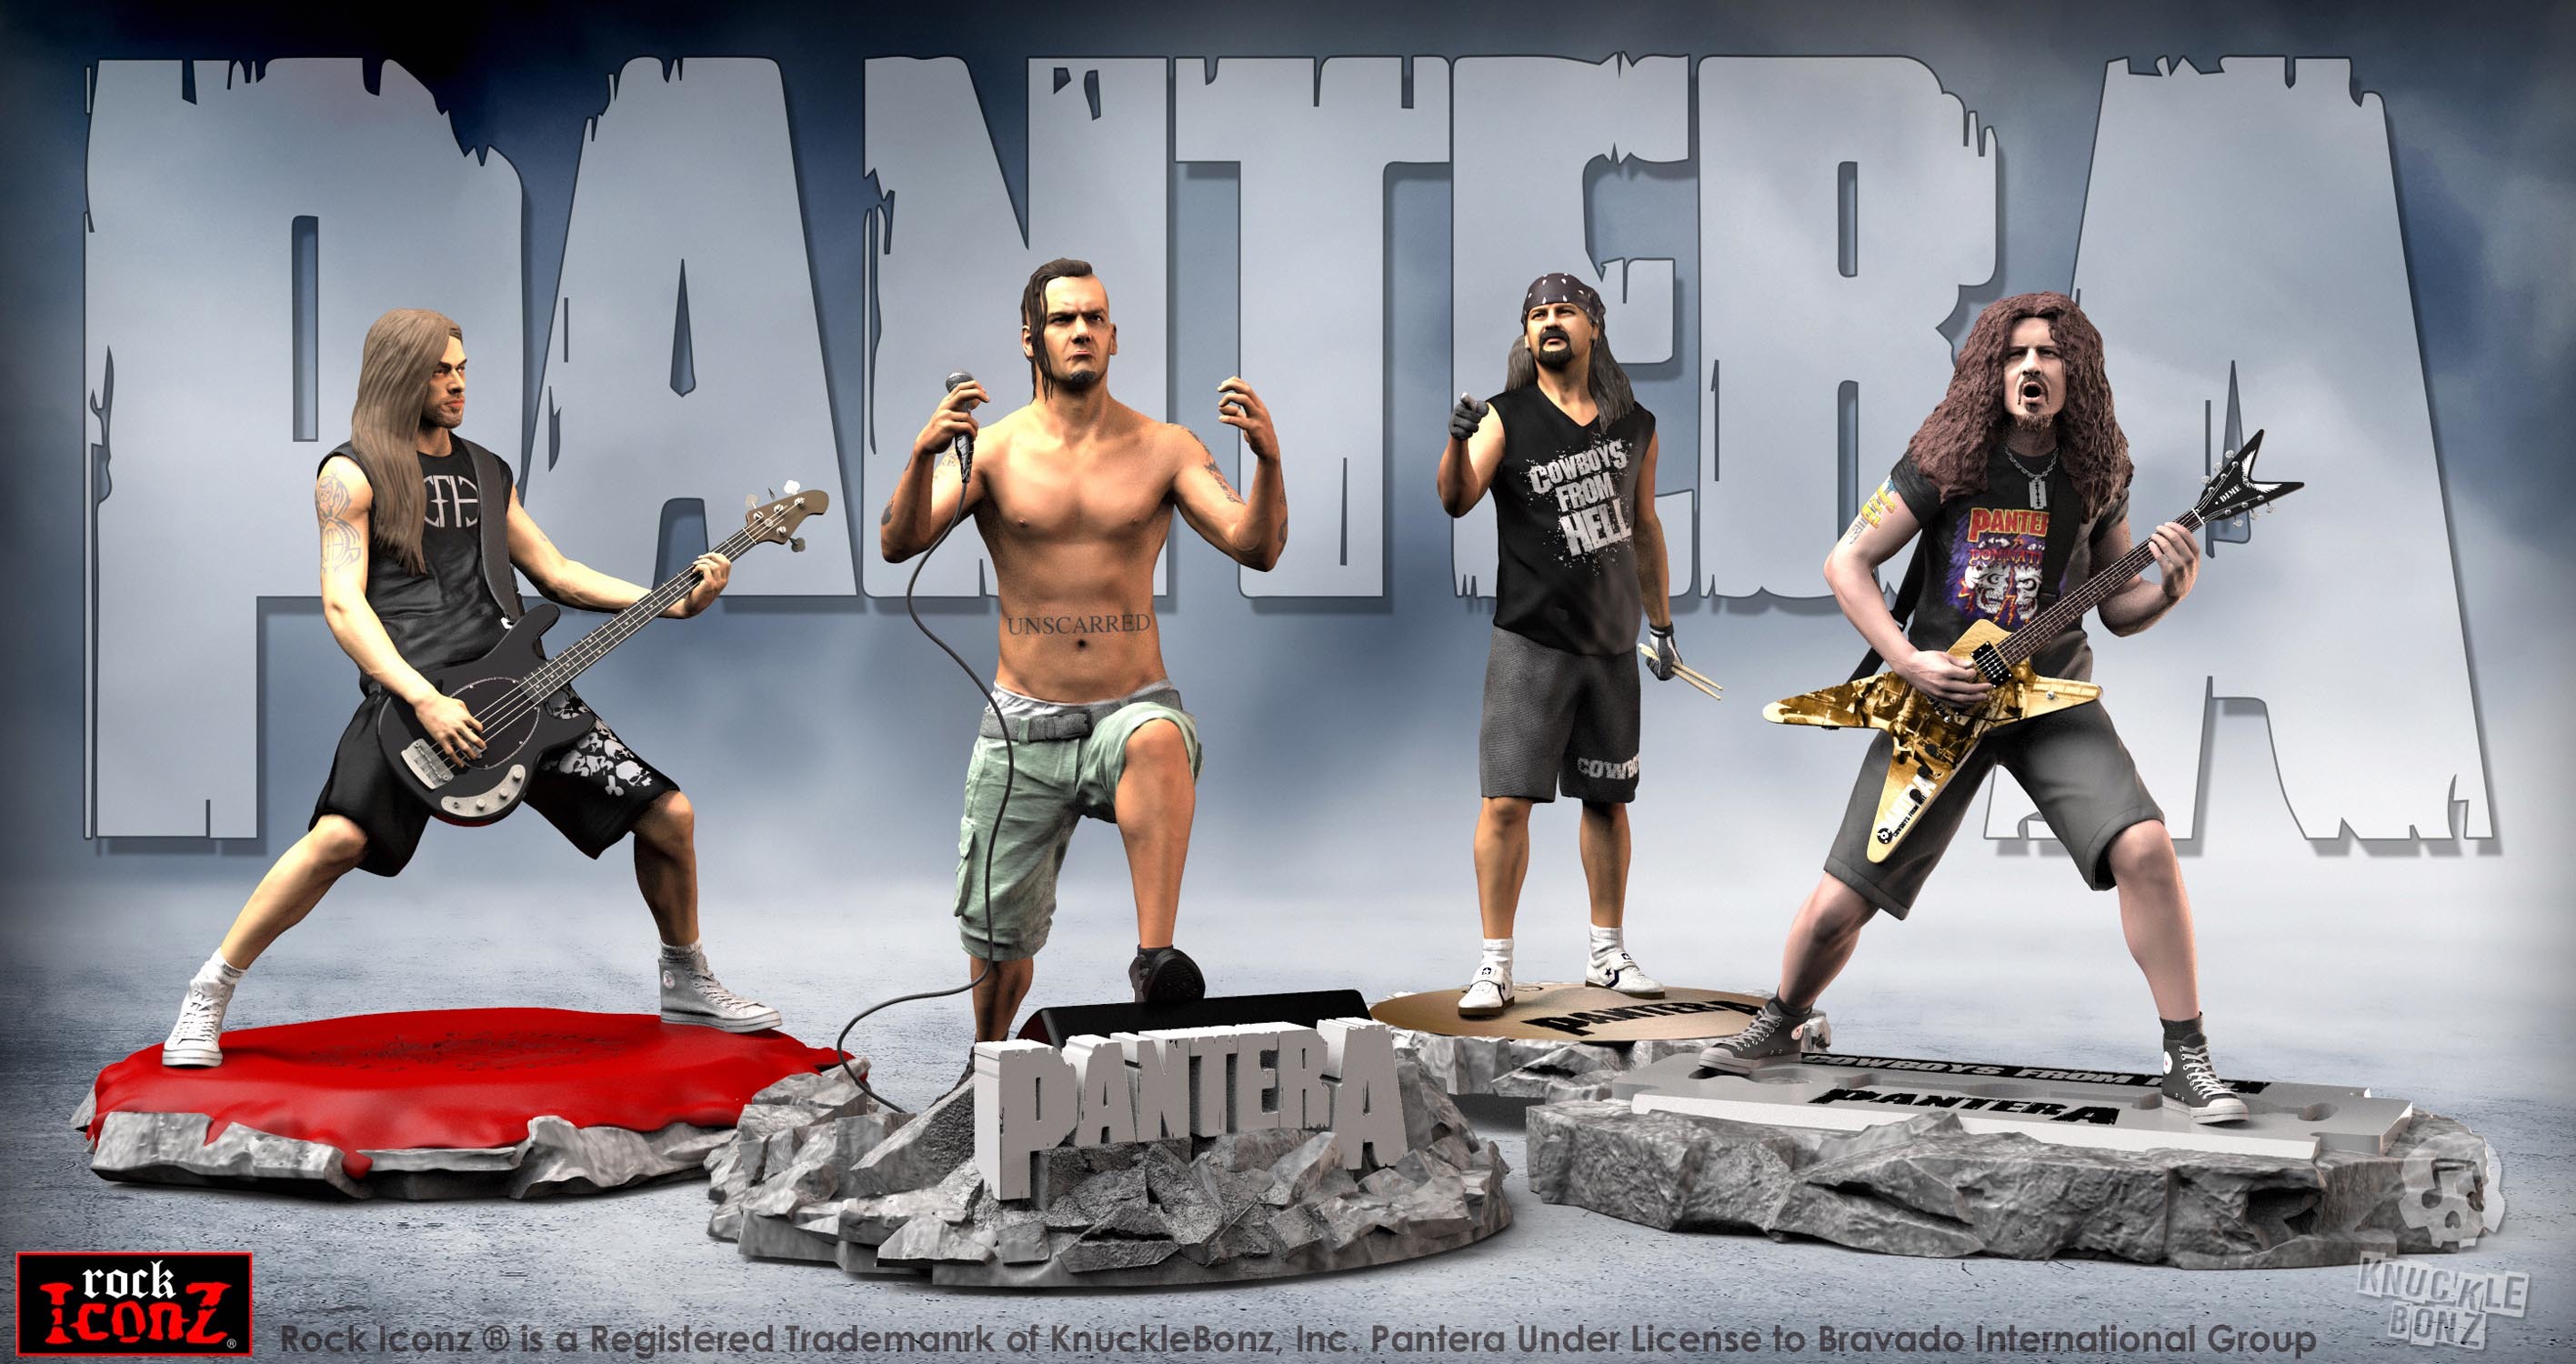 Pantera Release Cowboys From Hell Collectible Figurines | Kerrang!